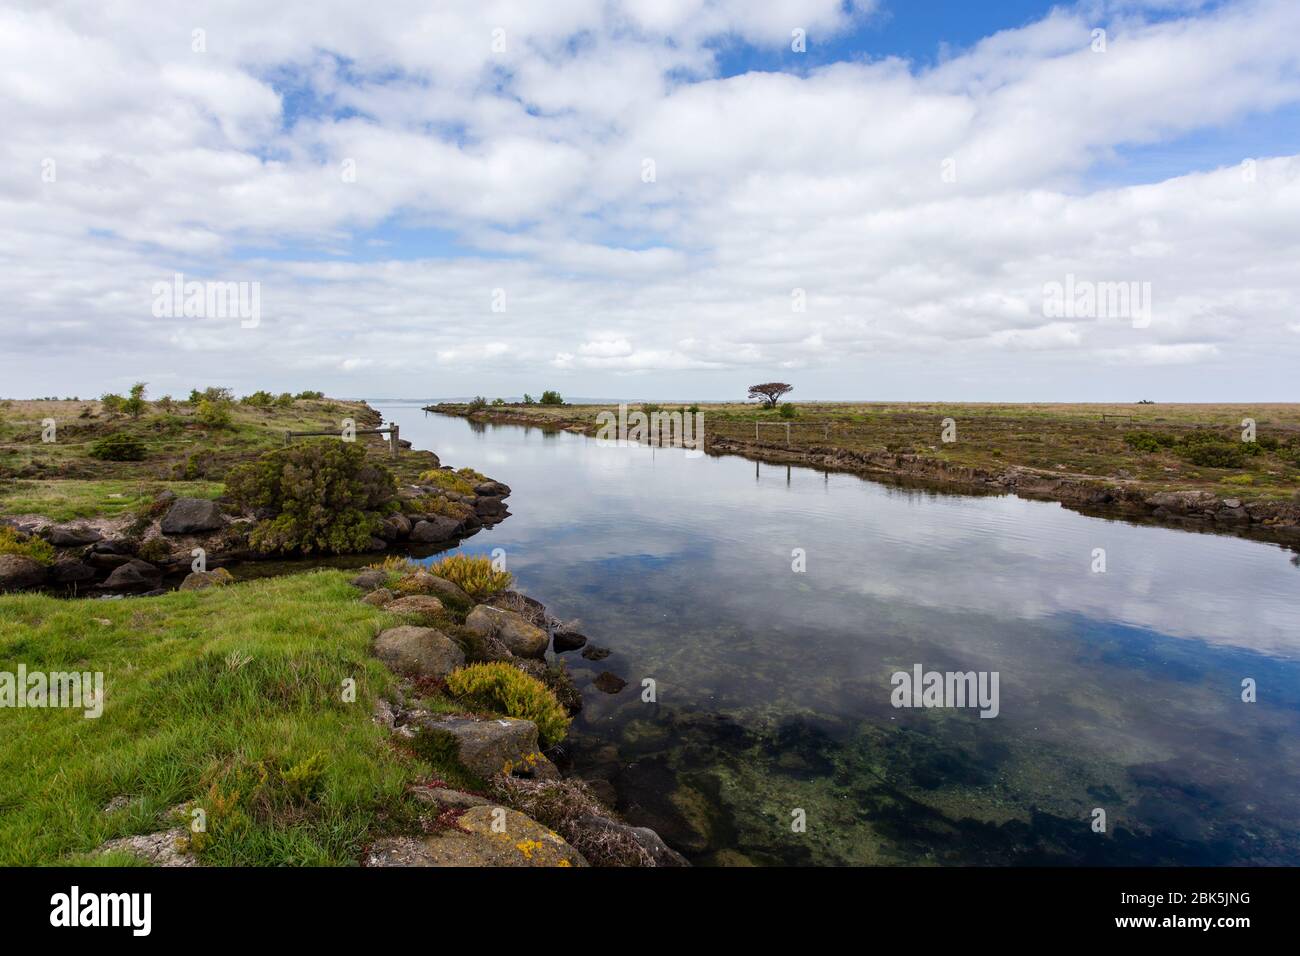 A saltmarsh at South Australia with a high diversity of marsh plants Stock Photo